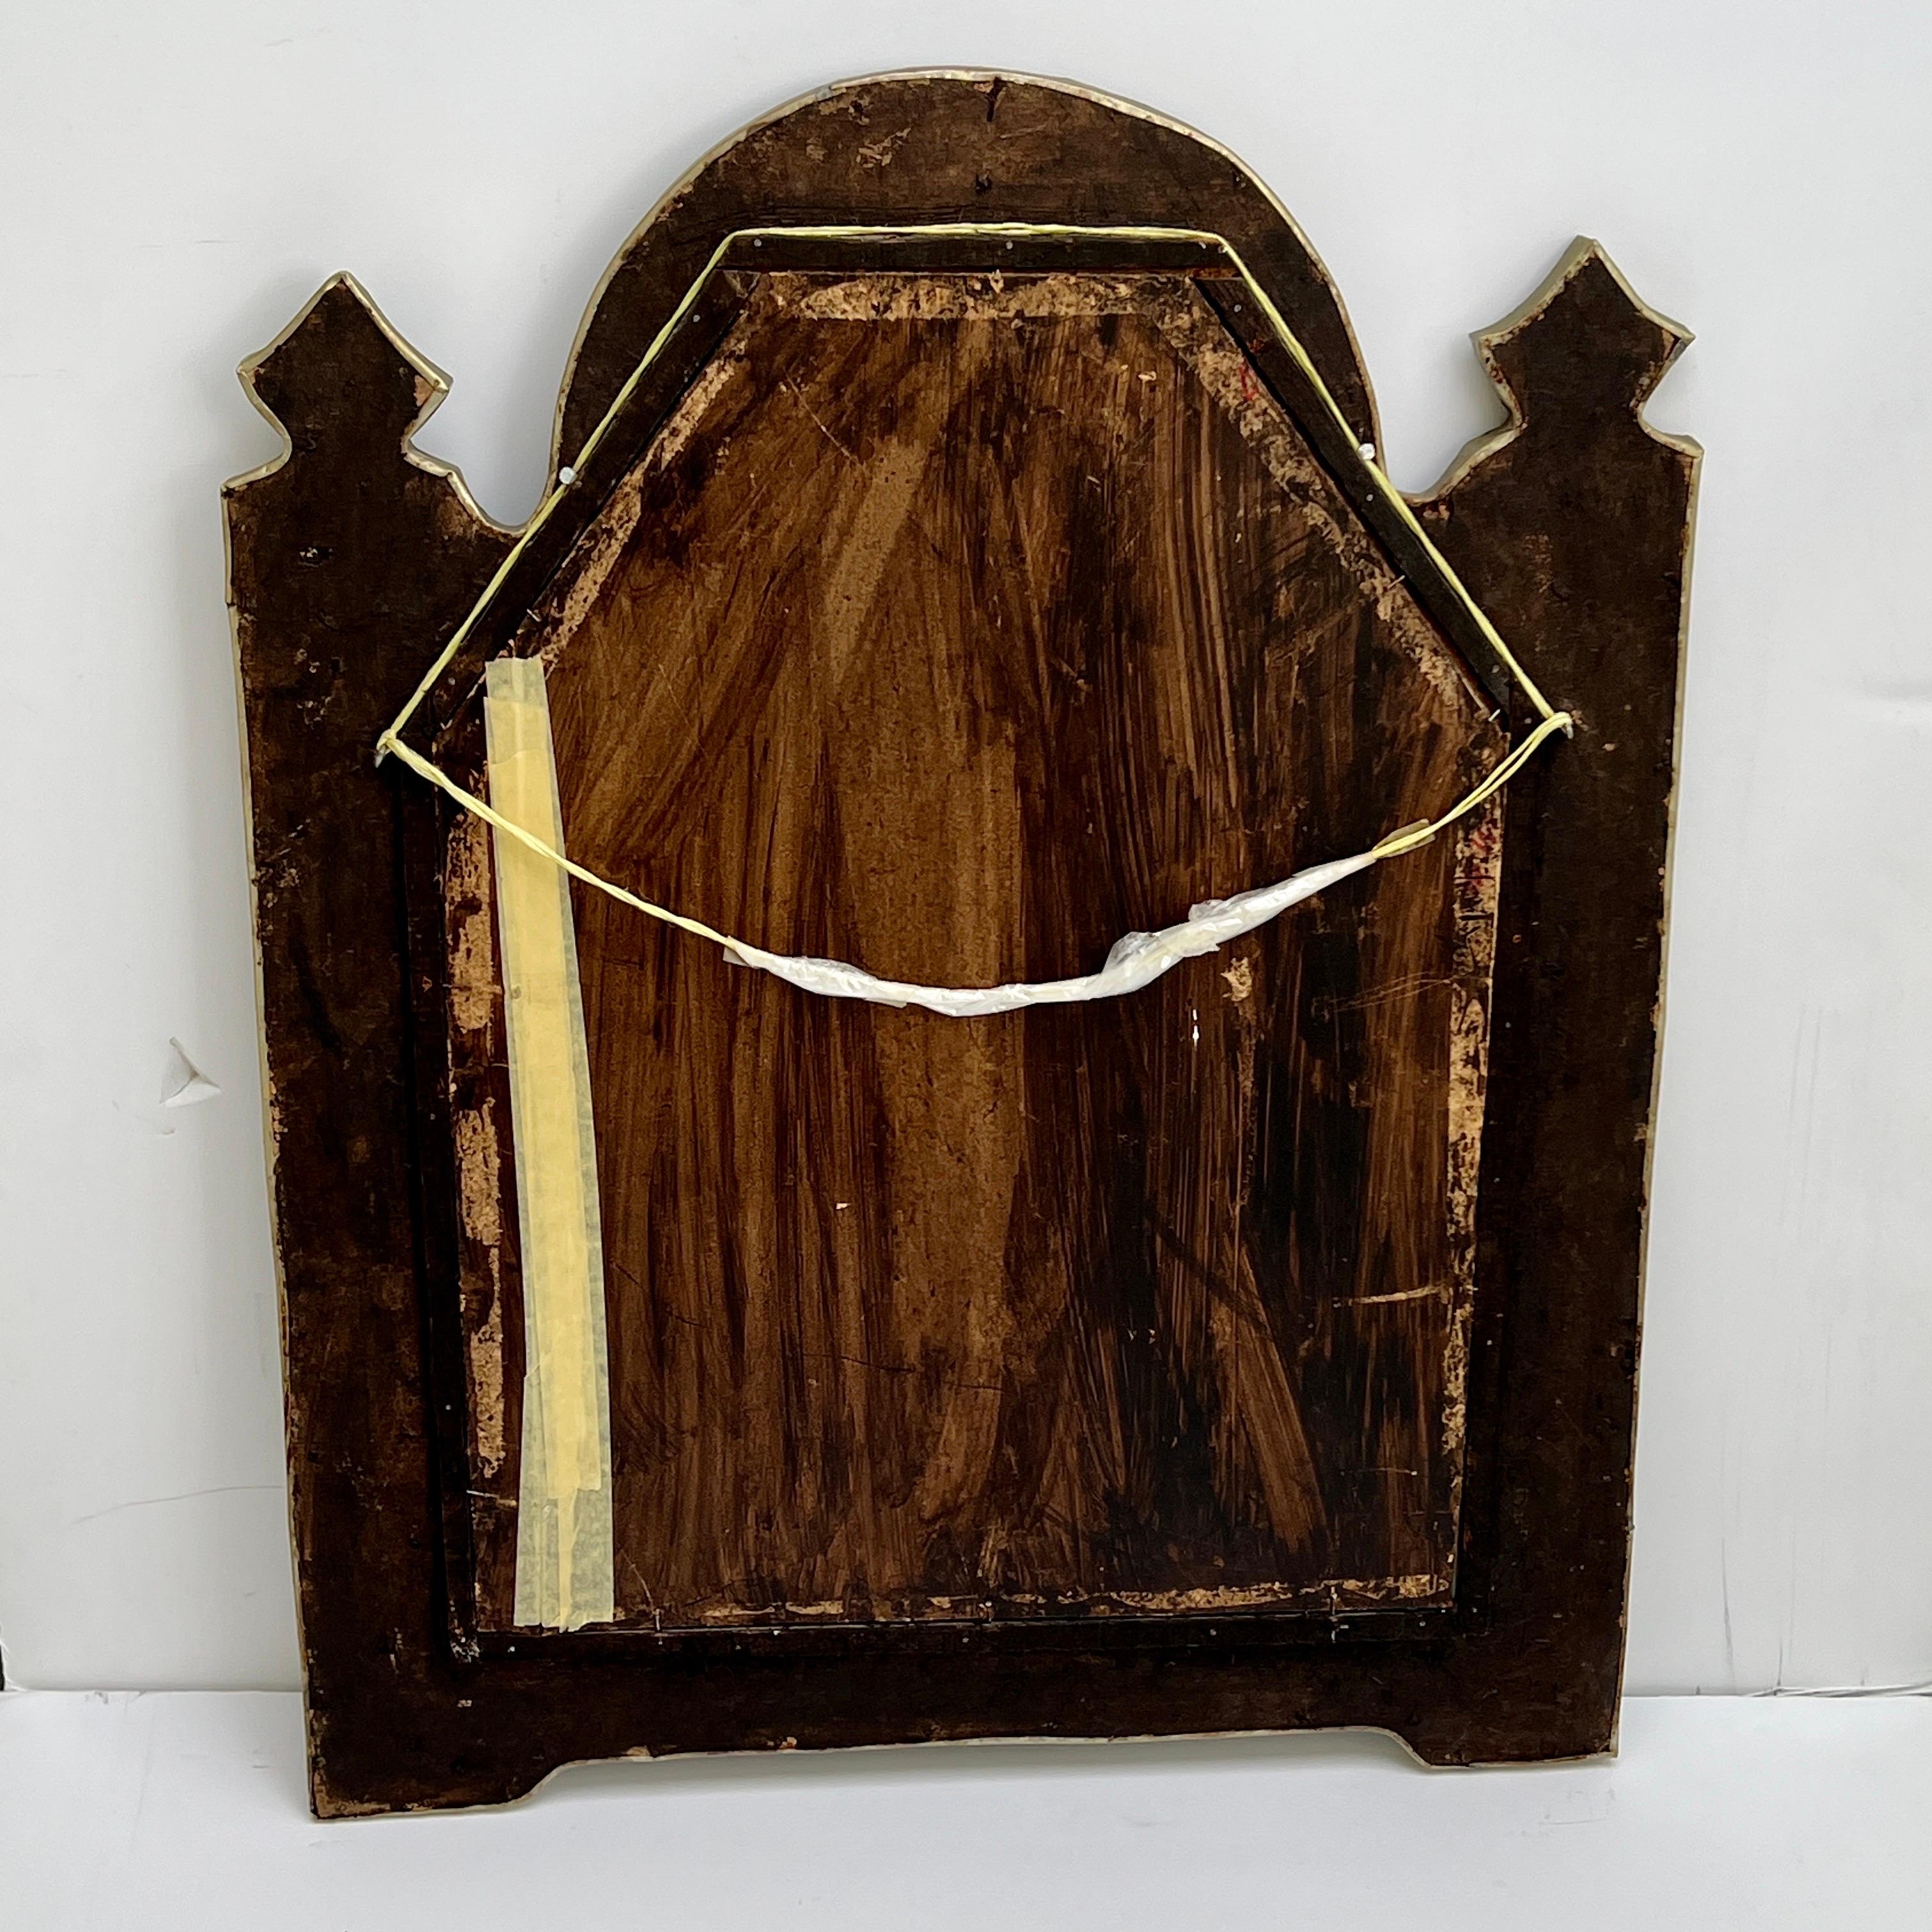 Moorish Arch Mirror in Enameled Cloisonné with Bone Inlays, Morocco c. 1950's For Sale 5